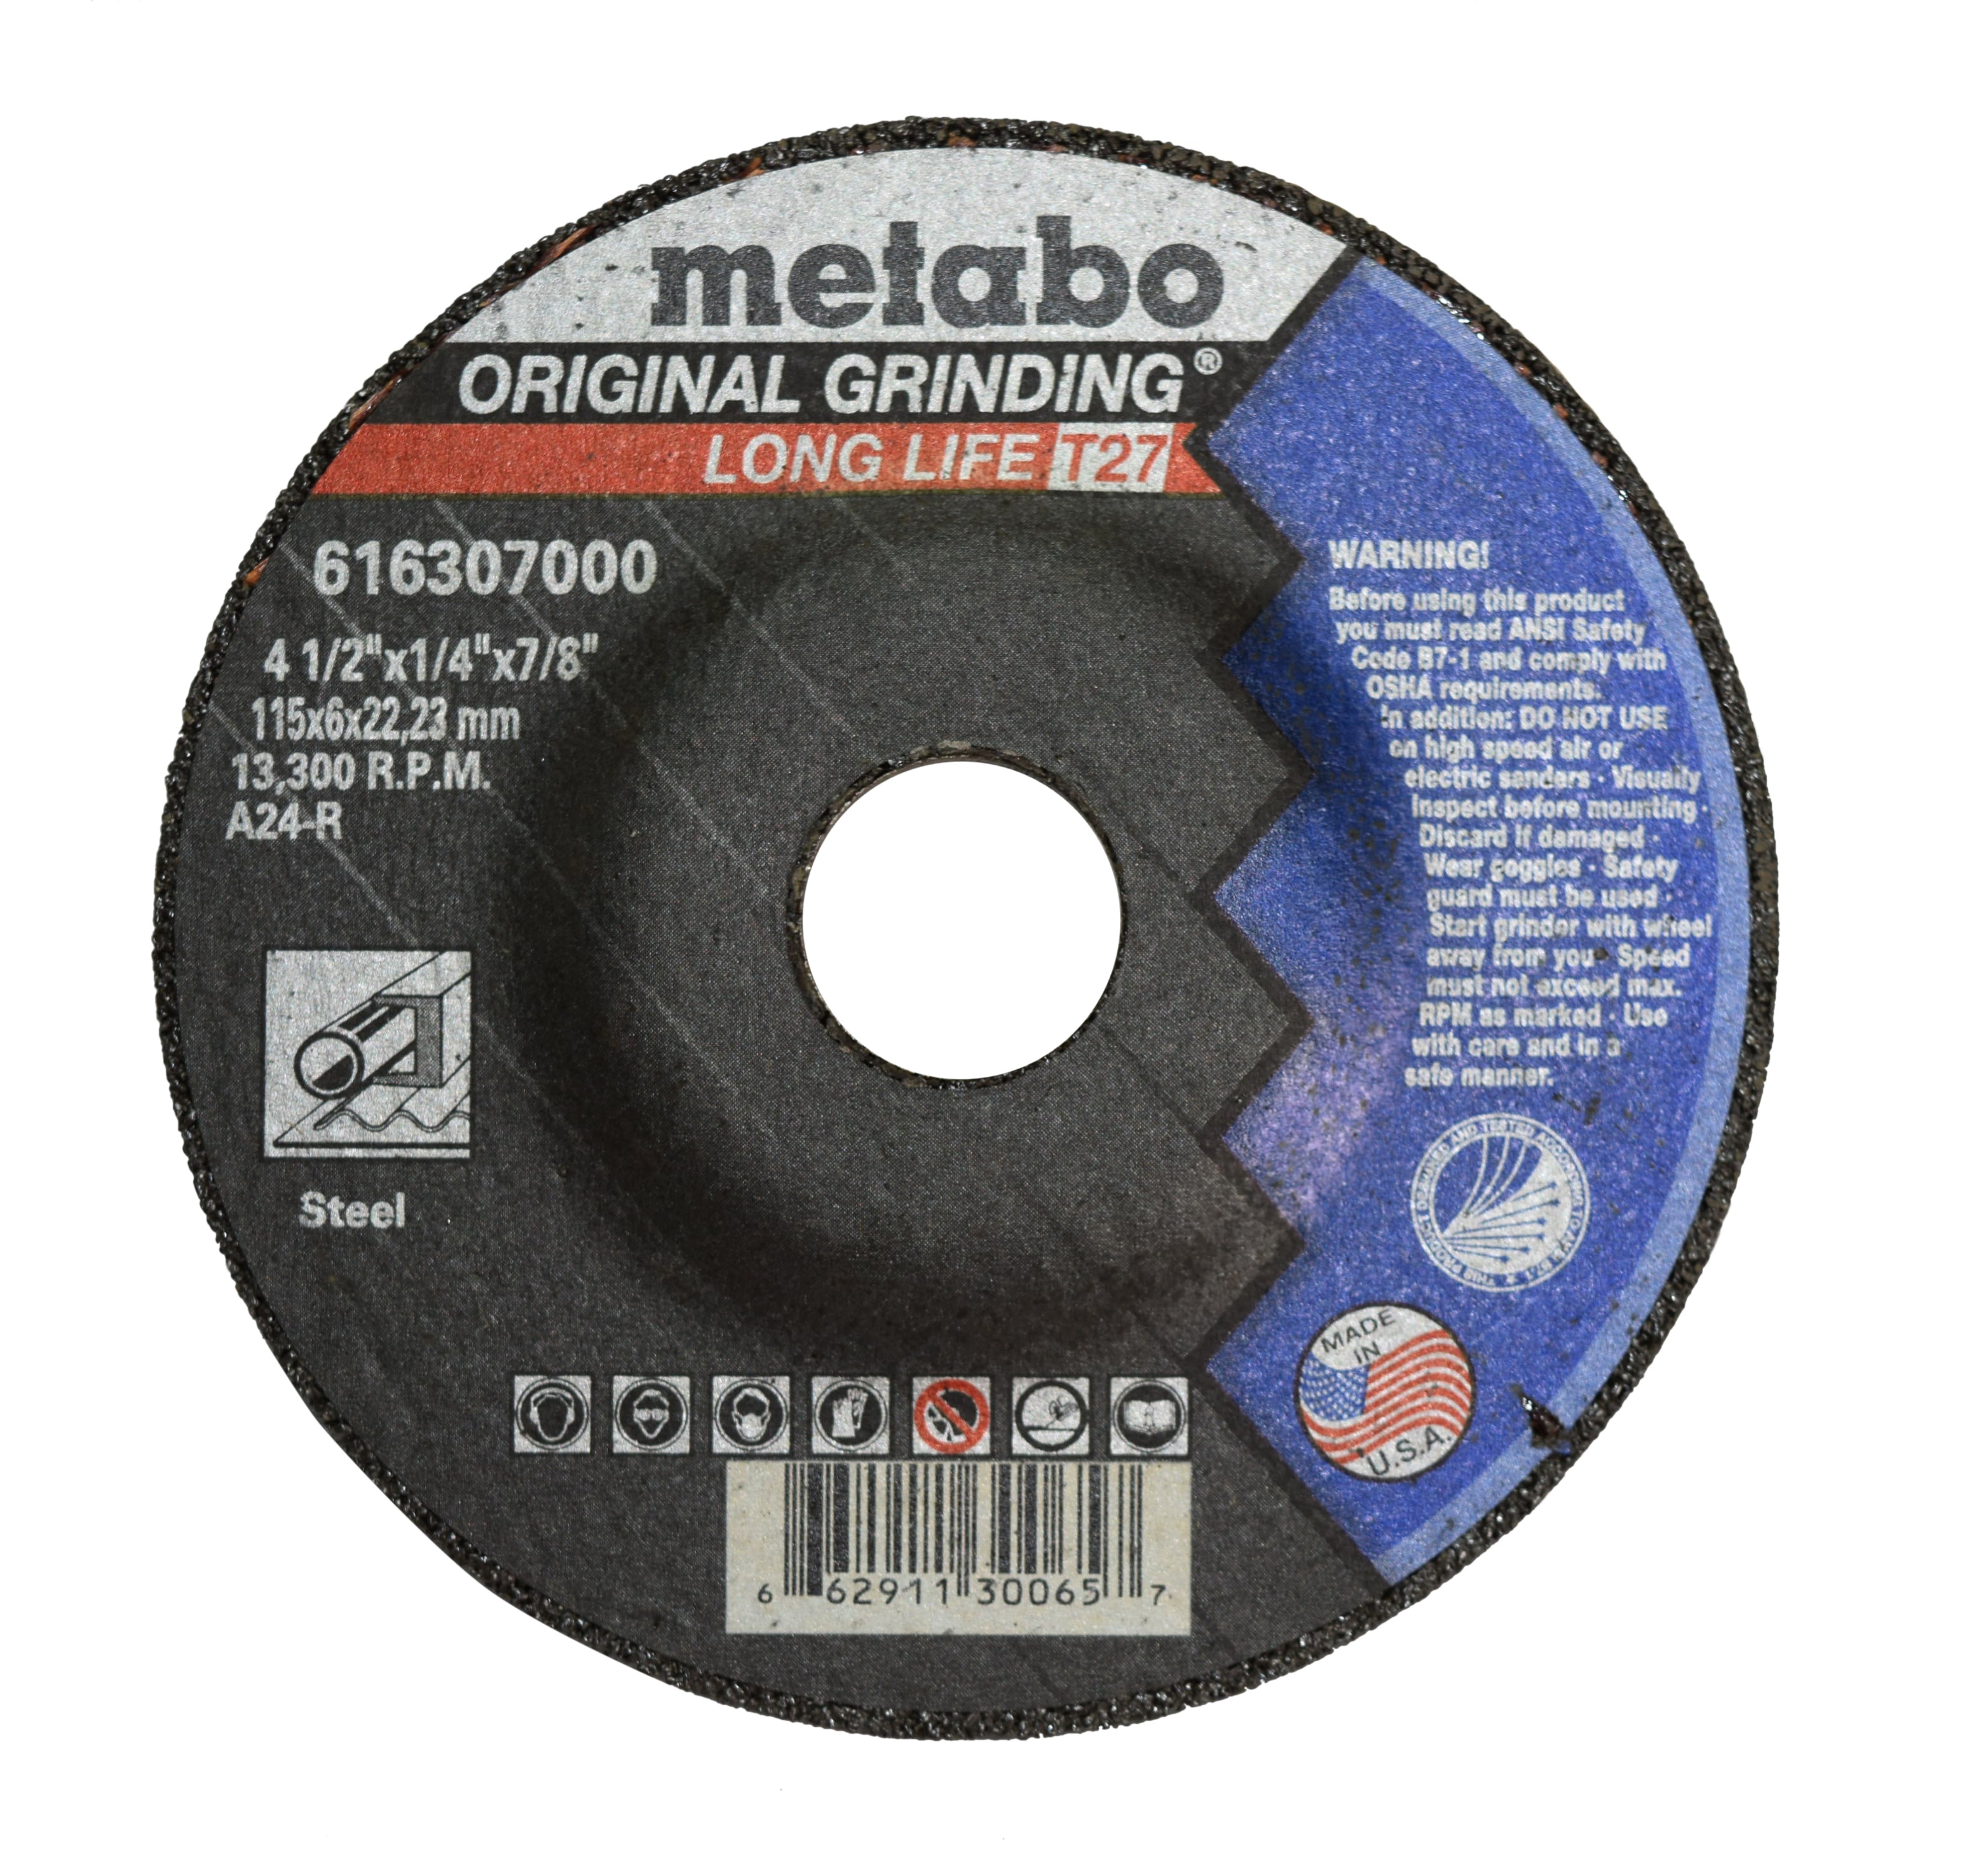 Metabo Grinding Wheels 616307000 4-1/2" x 1/4" A24R Type 27